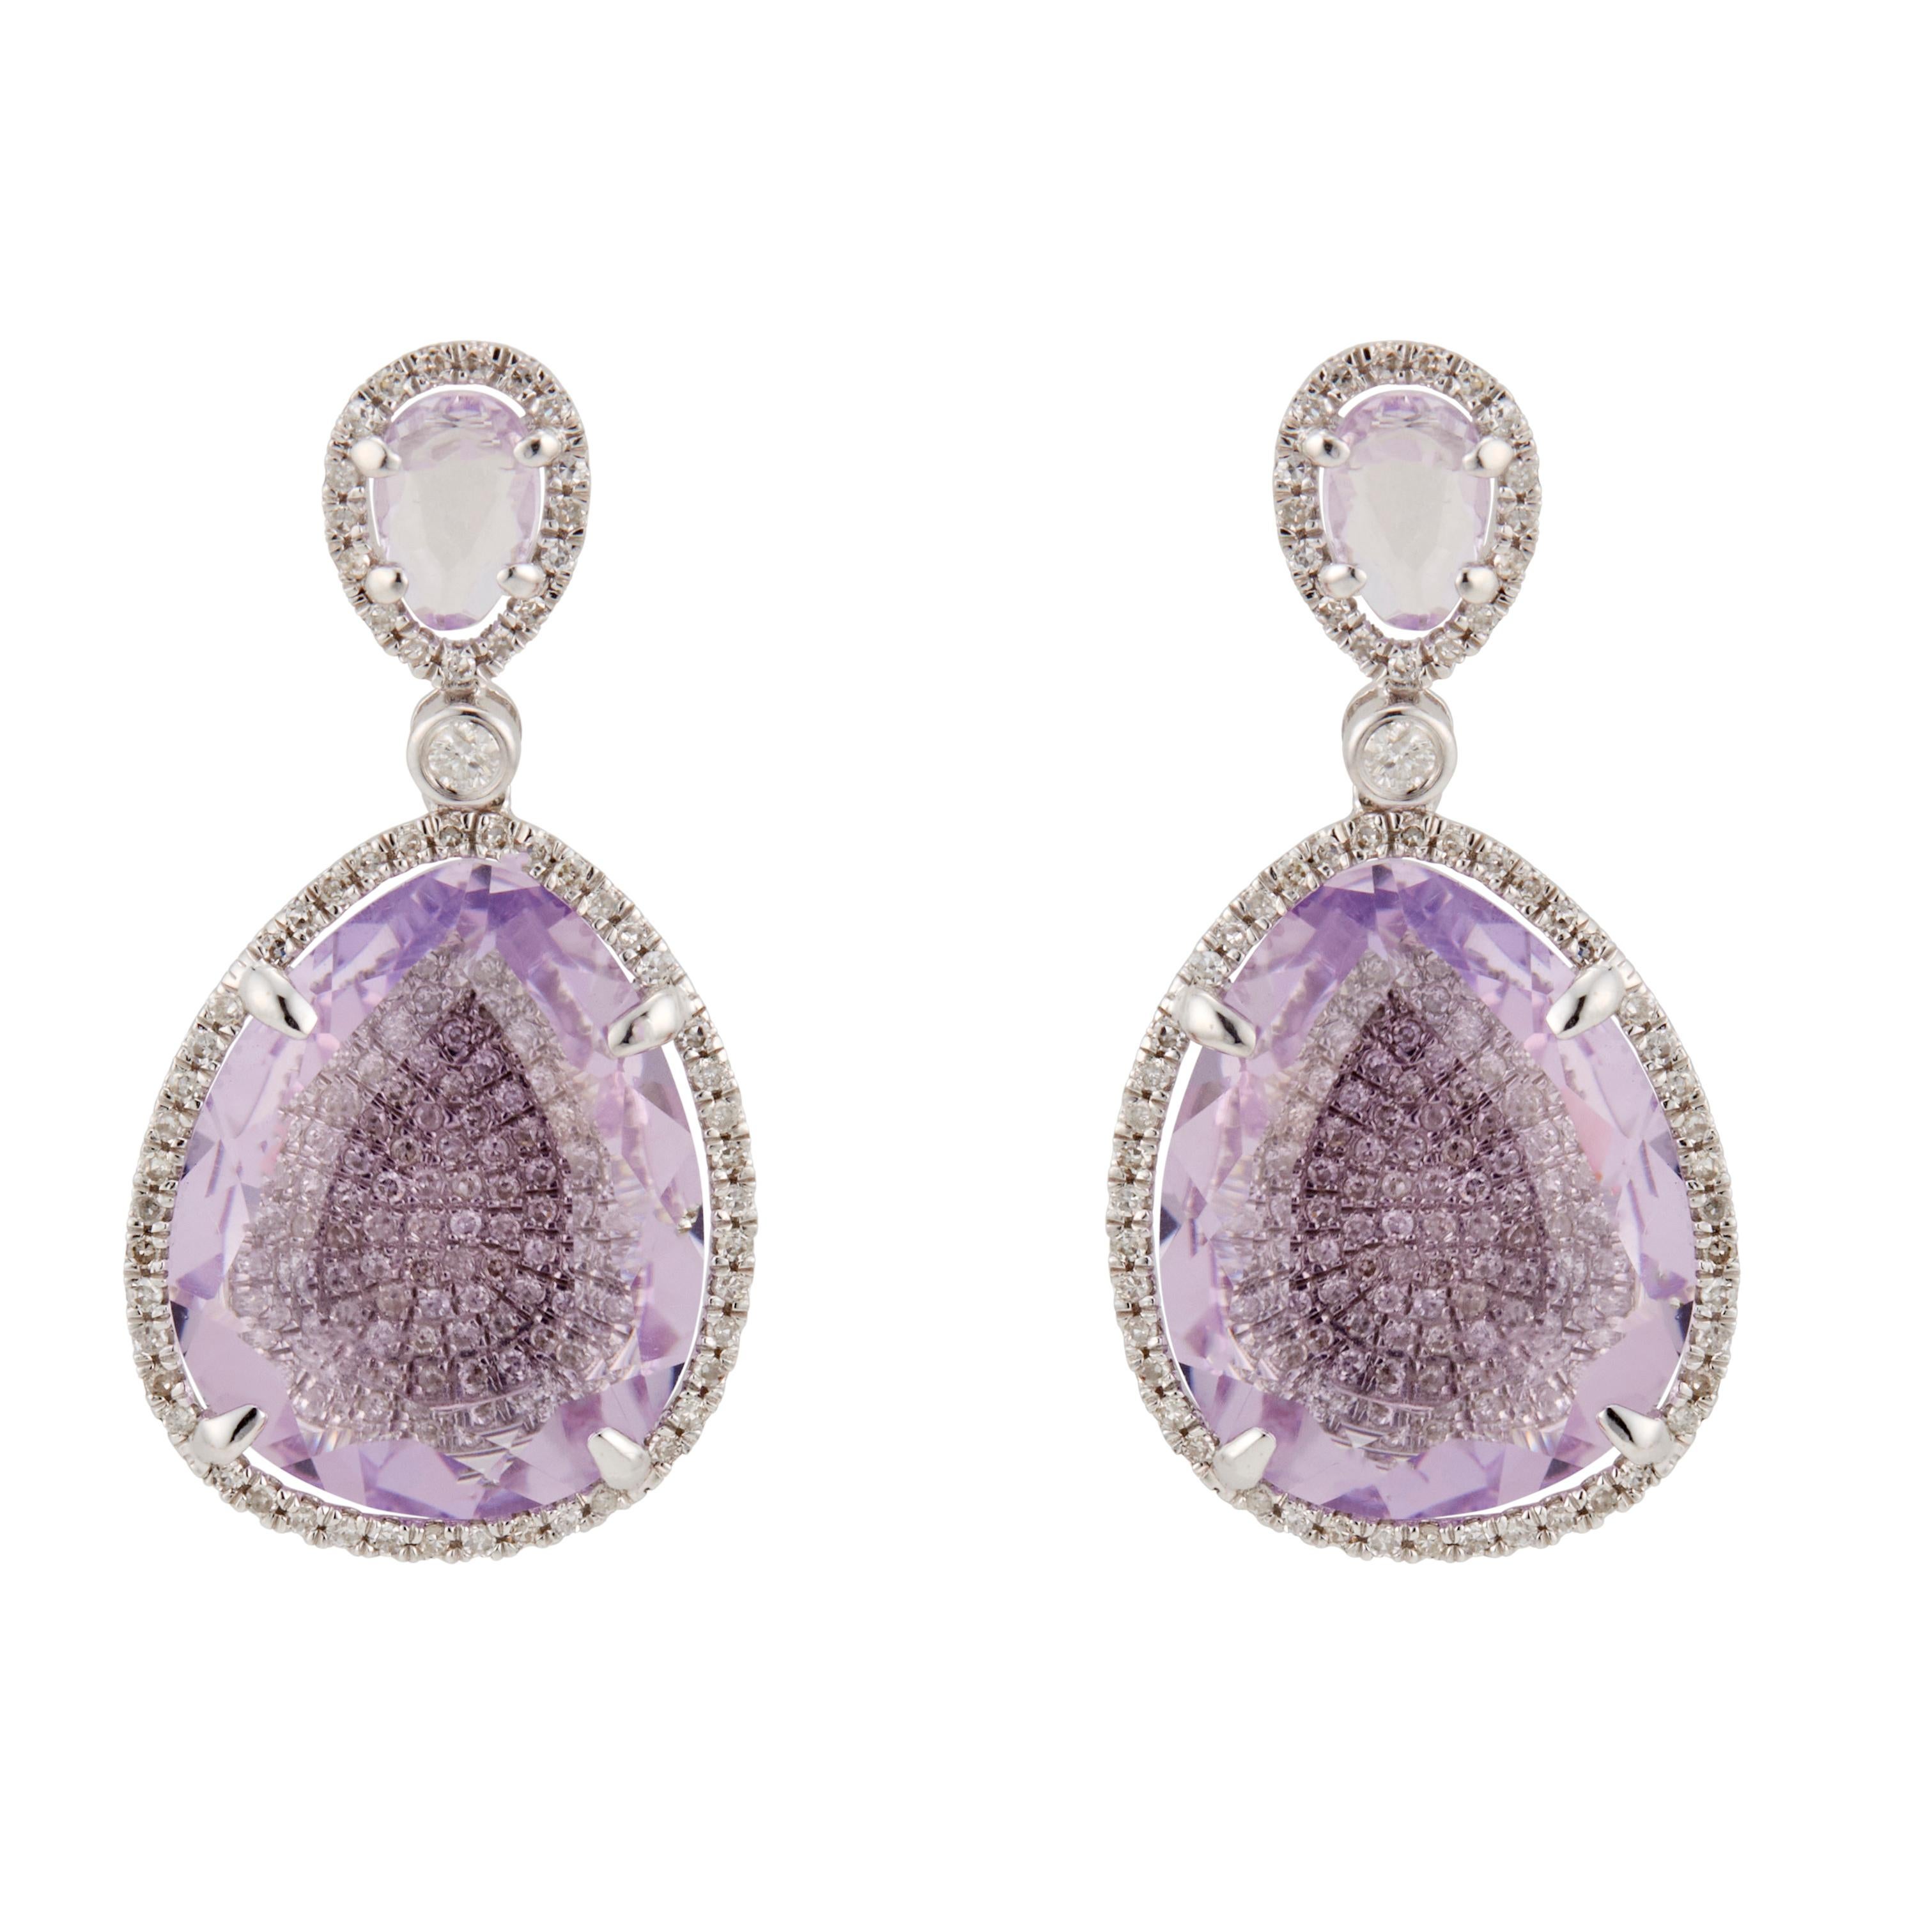 Amethyst and diamond halo dangle earrings. 4 pear shaped amethyst set in 14k white gold with round diamond halos.

2 pear shaped purple Amethyst, approx. total weight 7.80cts, 6.28 x 4.10 x 1.62mm
2 pear shaped purple Amethyst, approx. total weight